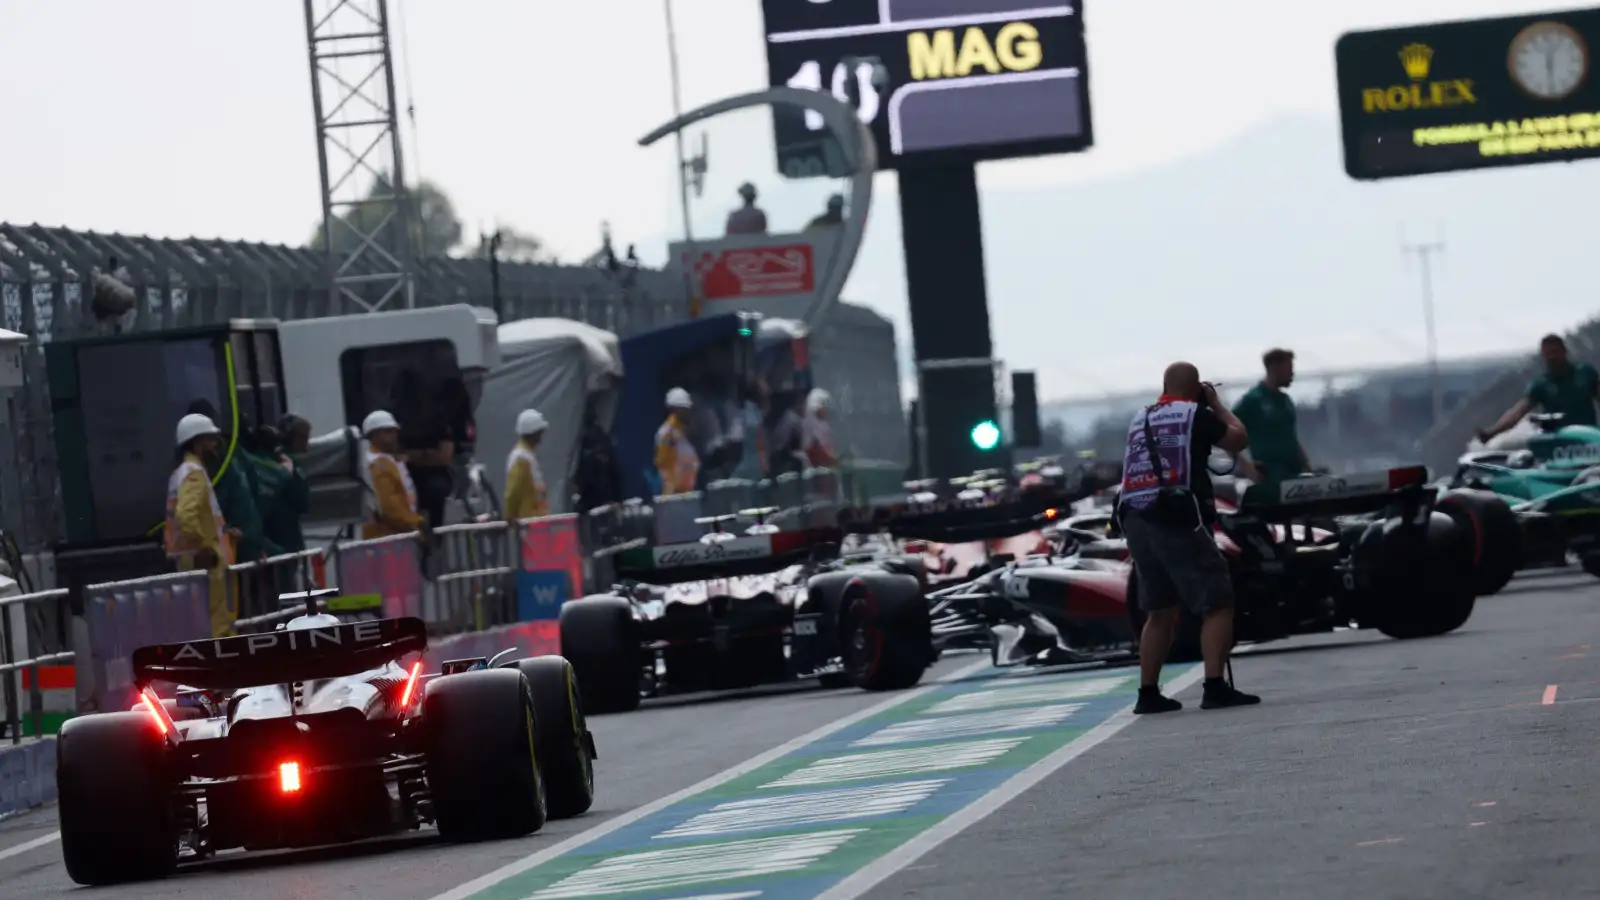 F1 cars heading on track at the Spanish Grand Prix. Barcelona, June 2023. Results